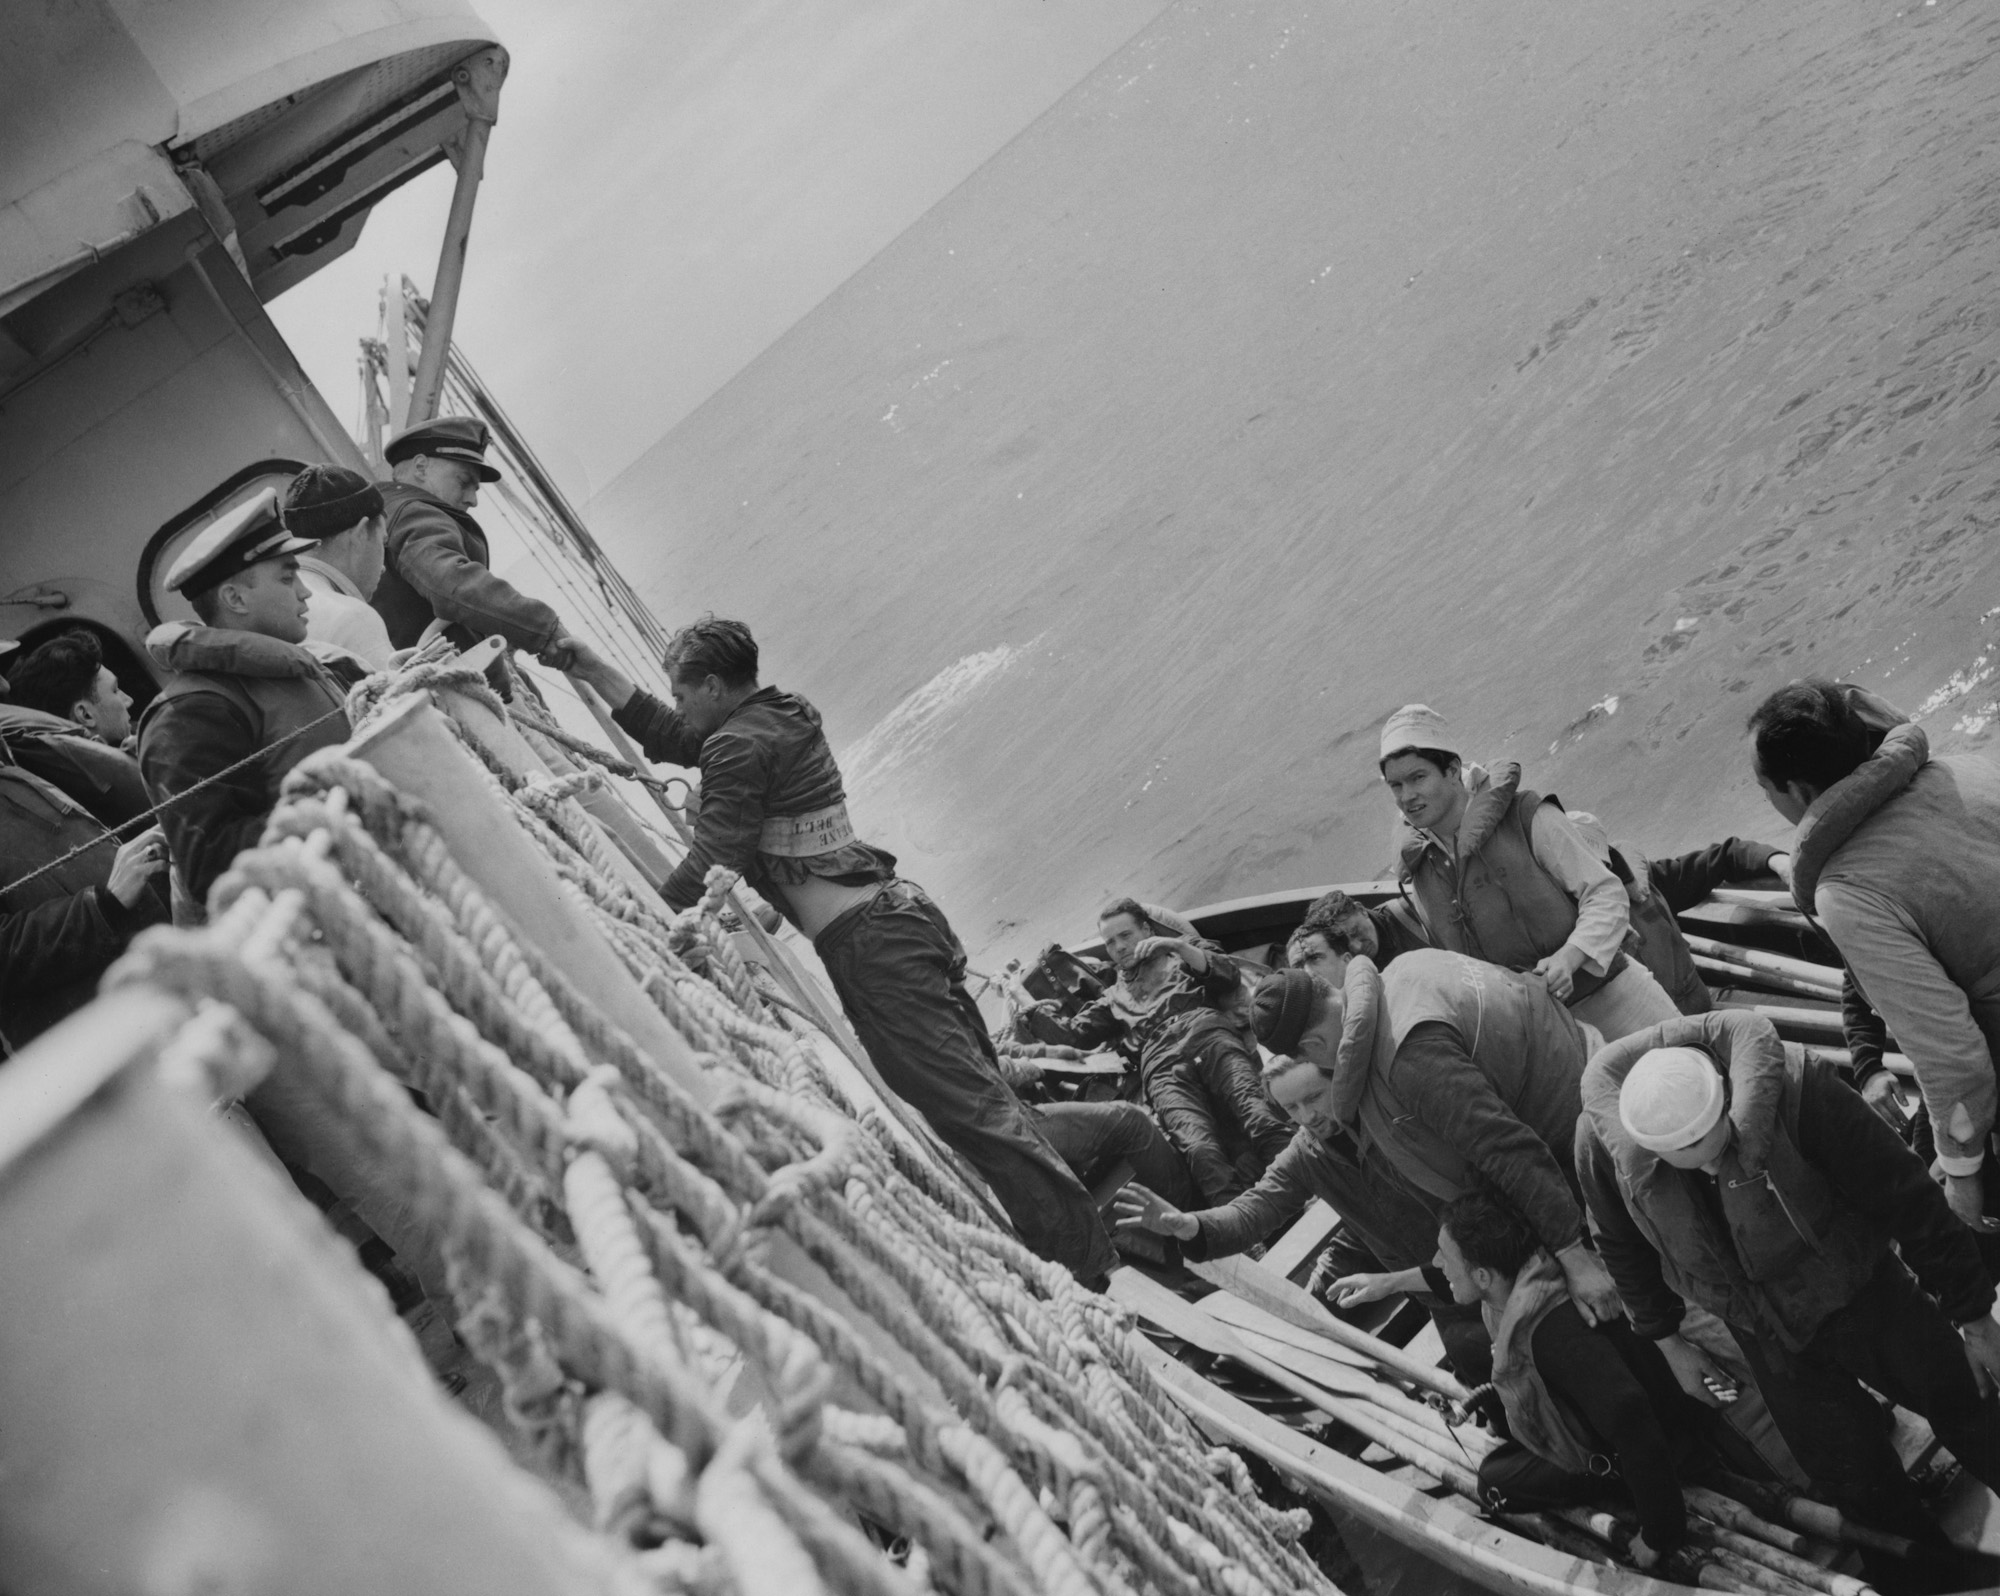 This photograph was scanned from my grandfather John "Jack" Baker's Warbook. This photo is of Nazi soldiers being helped aboard a Coast Guard cutter after their U-Boat (U-175) was destroyed in a battle. This photograph was taken aboard the USS Spencer by Jack January on April 17, 1943. The event took place in the North Atlantic while on a convoy mission (HX-233) from the United States to the United Kingdom.

Although my grandfather had told me about this event numerous times, the part that he recounted the most was what happened shortly after the Nazi's were brought aboard -- they were given ice cream. He said that in all his years aboard the USS Duane, he was never given ice cream. Even further - he was a medic and he was obligated to treat them. Despite the fact that the USCG cutter ships were firing weapons at these men moments earlier, he now had to give them medical attention as they ate ice cream in front of him. View full size.

The official recount of the story can be found here. 